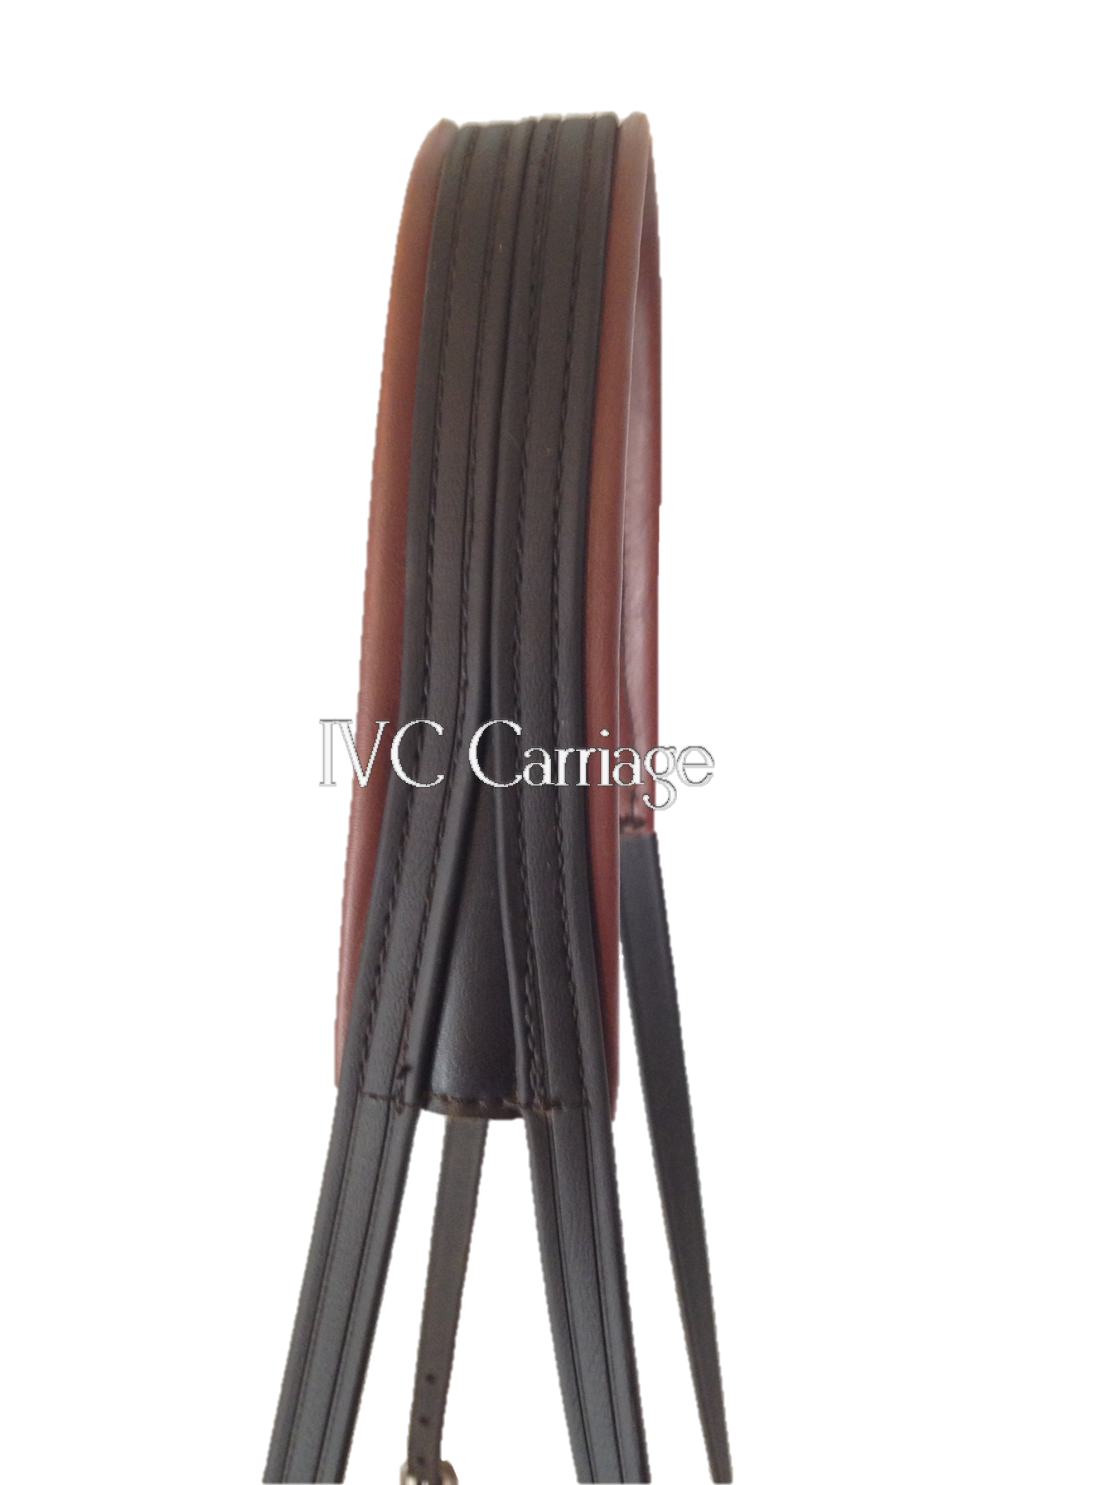 BioThane Harness Hip Strap | IVC Carriage